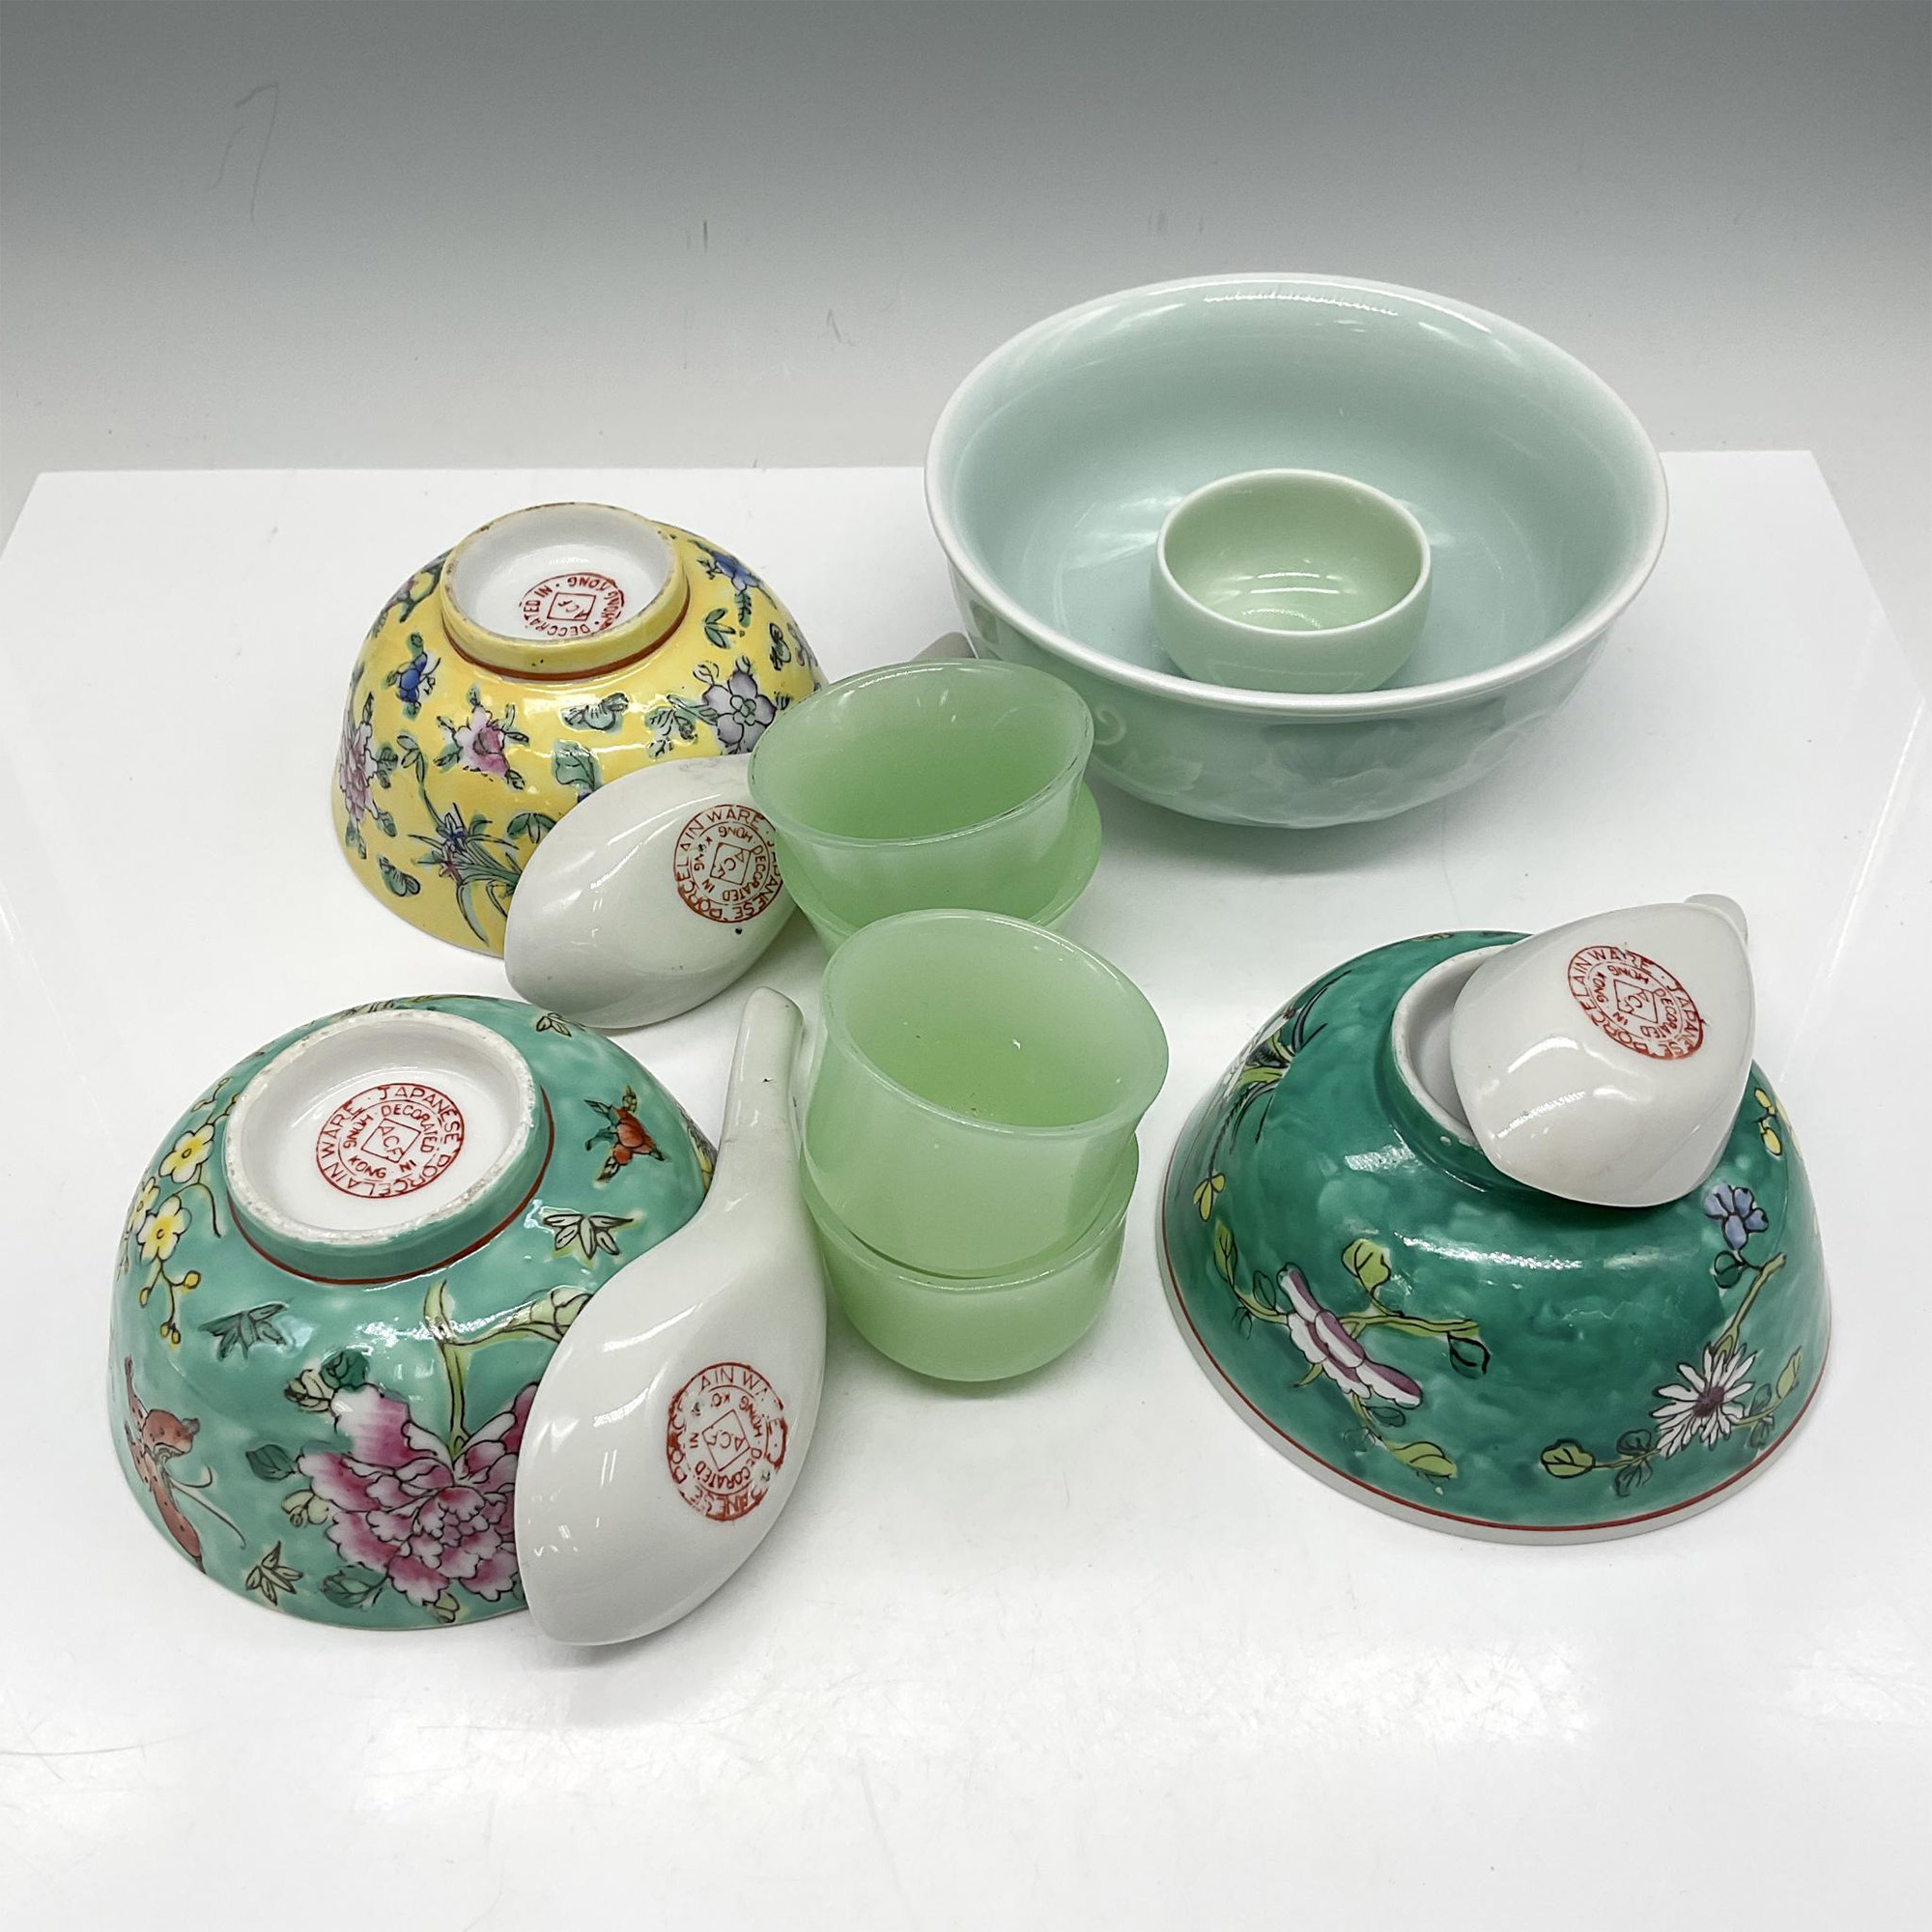 12pc Chinese and Japanese Porcelain Bowls + Sake Cups - Image 3 of 3